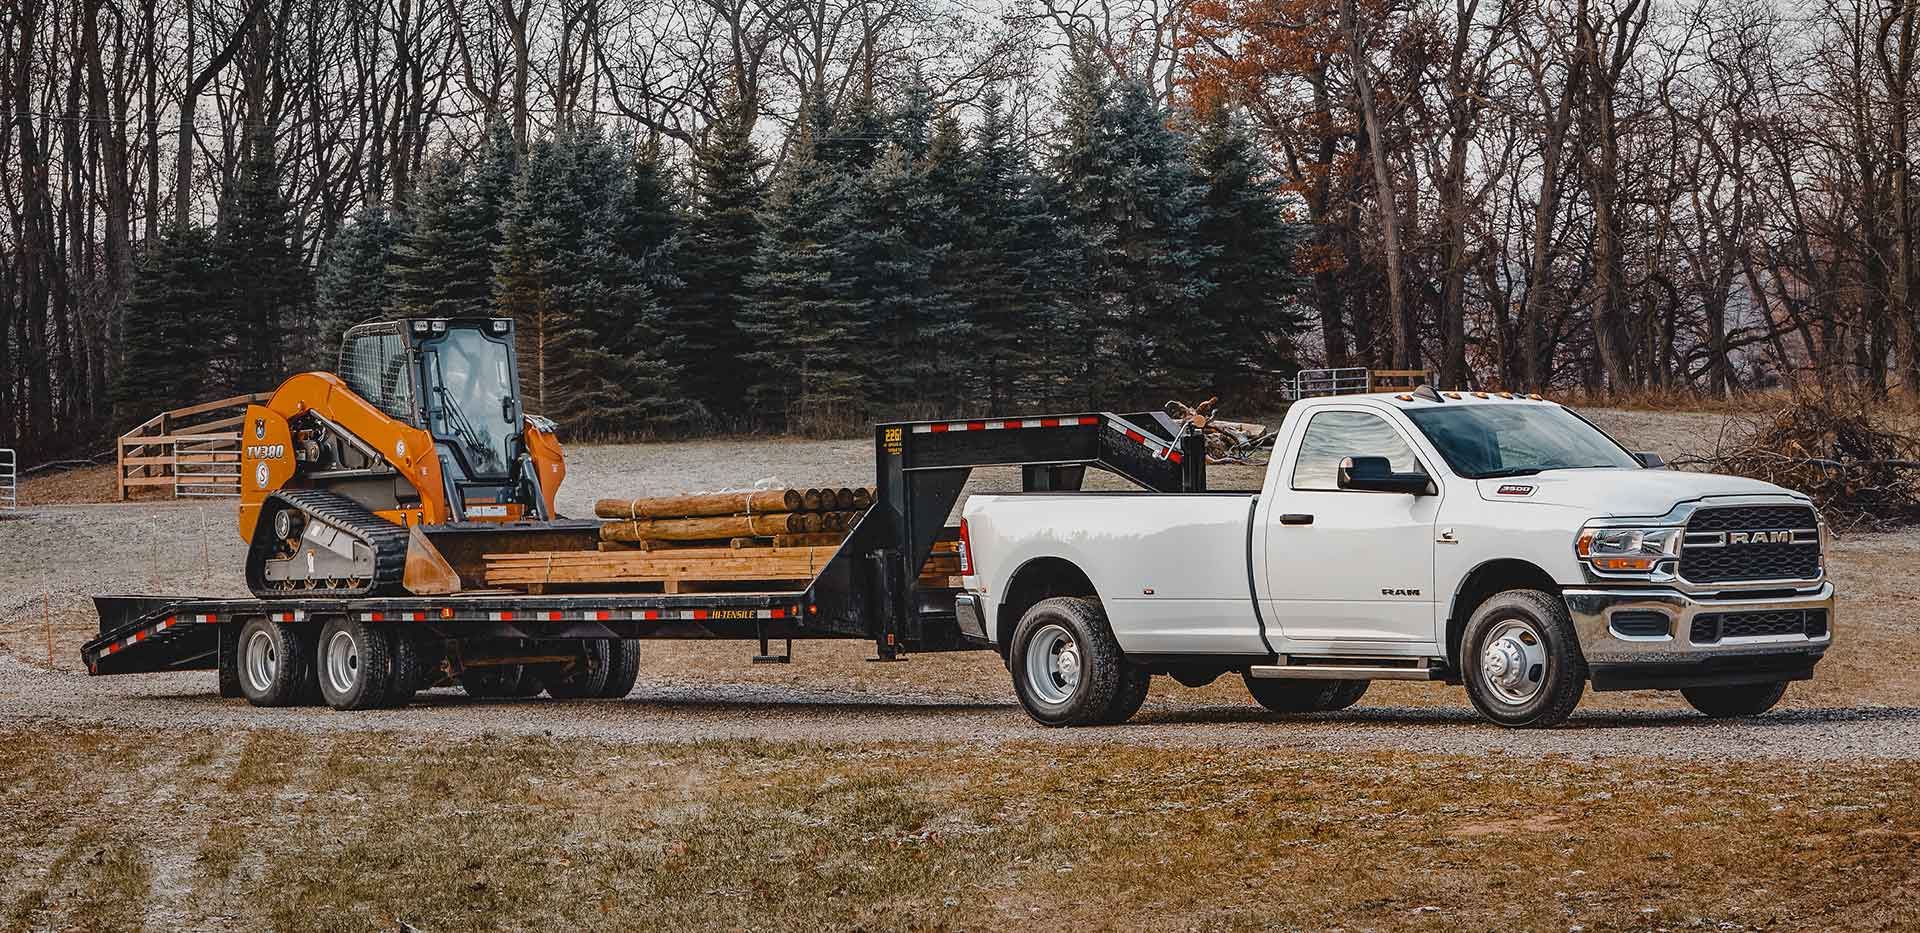 The 2022 Ram 3500 towing a flatbed loaded with an excavator.